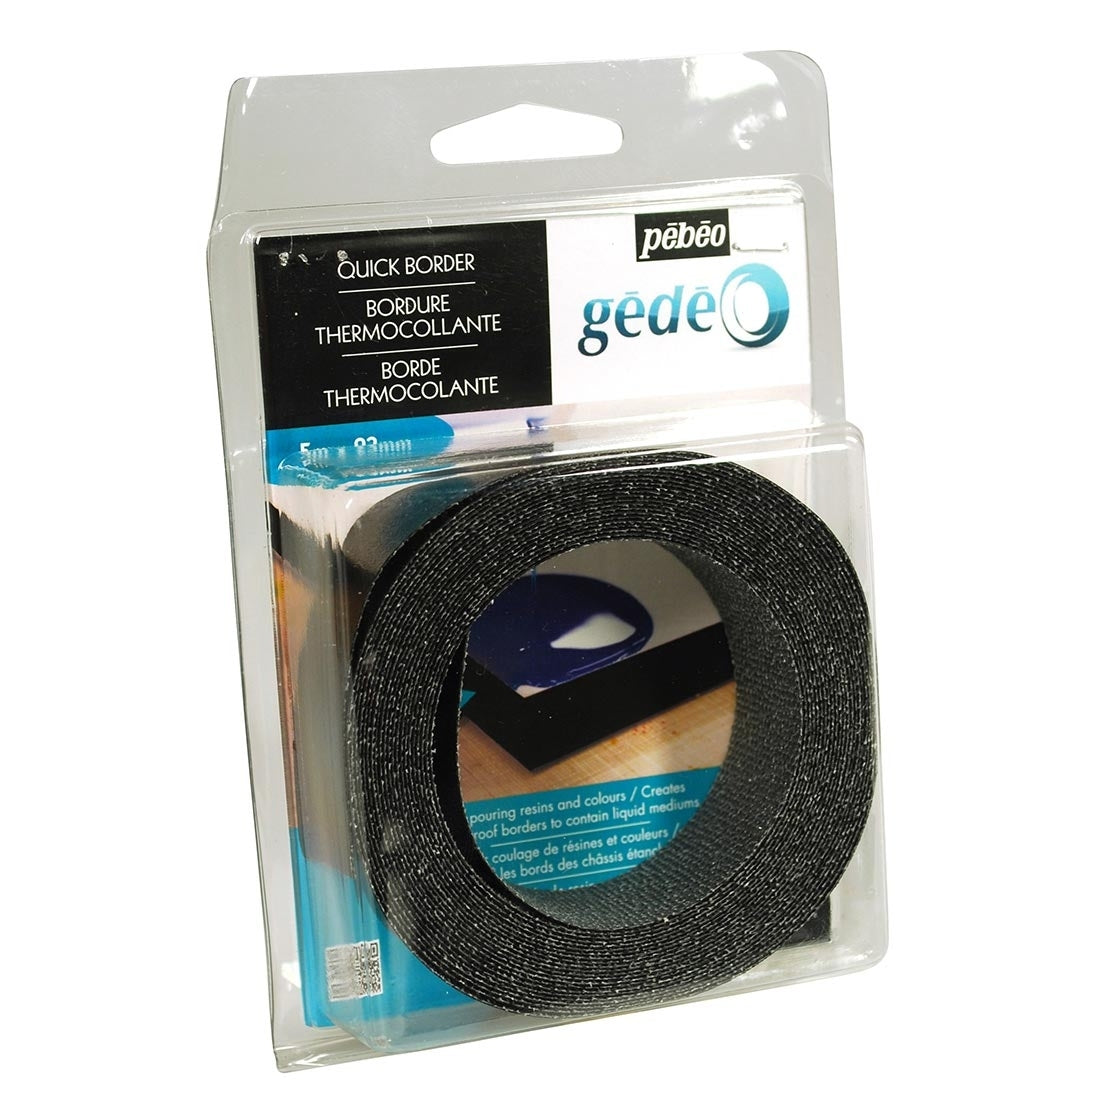 Pebeo - Gedeo - Resin & Pouring Quick Border Tape  - 23mm